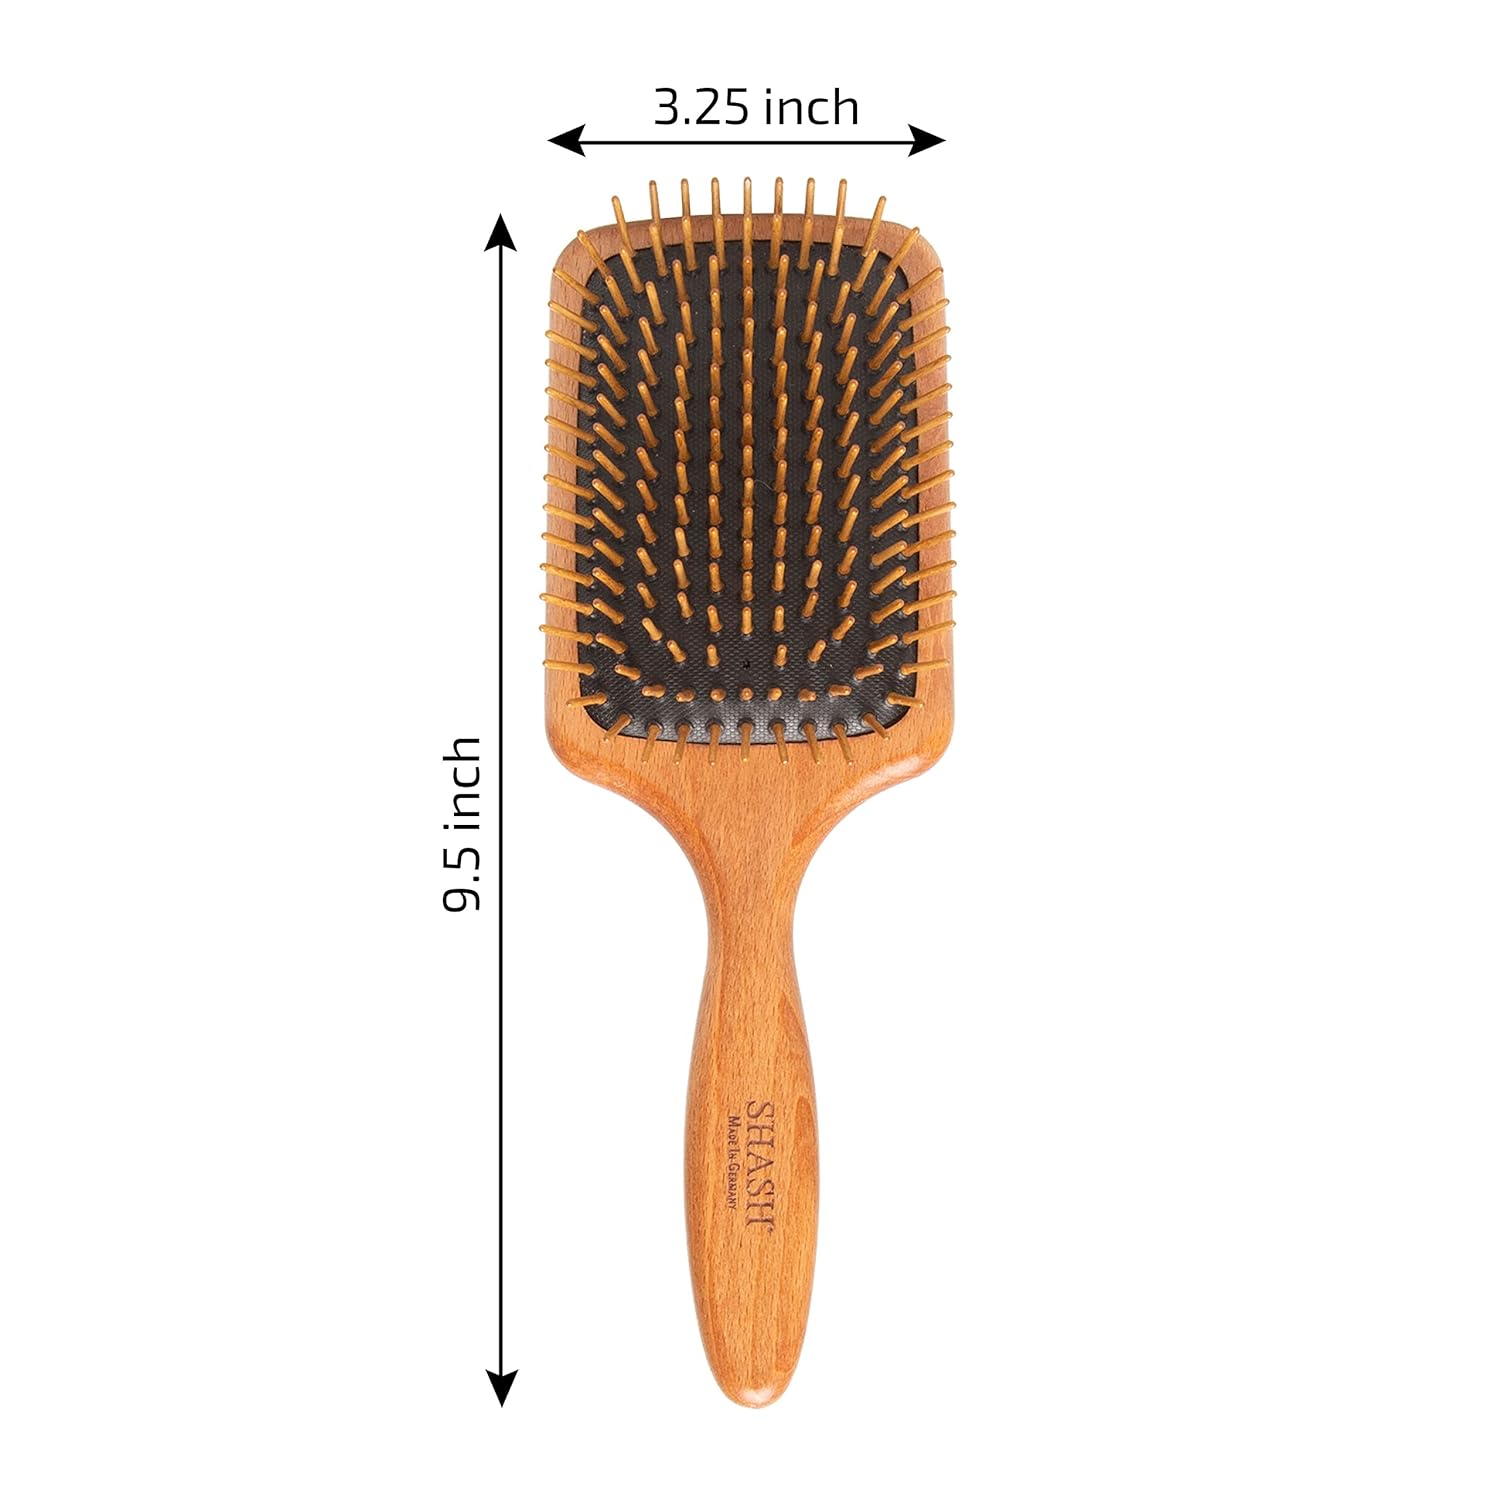 Since 1869 Made in Germany Wooden Paddle Brush - Gently Detangles, Styles, Conditions Hair with Minimal Frizz and Breakage - Safe for All Hair Types, Wet or Dry - Eco-Sourced Wood